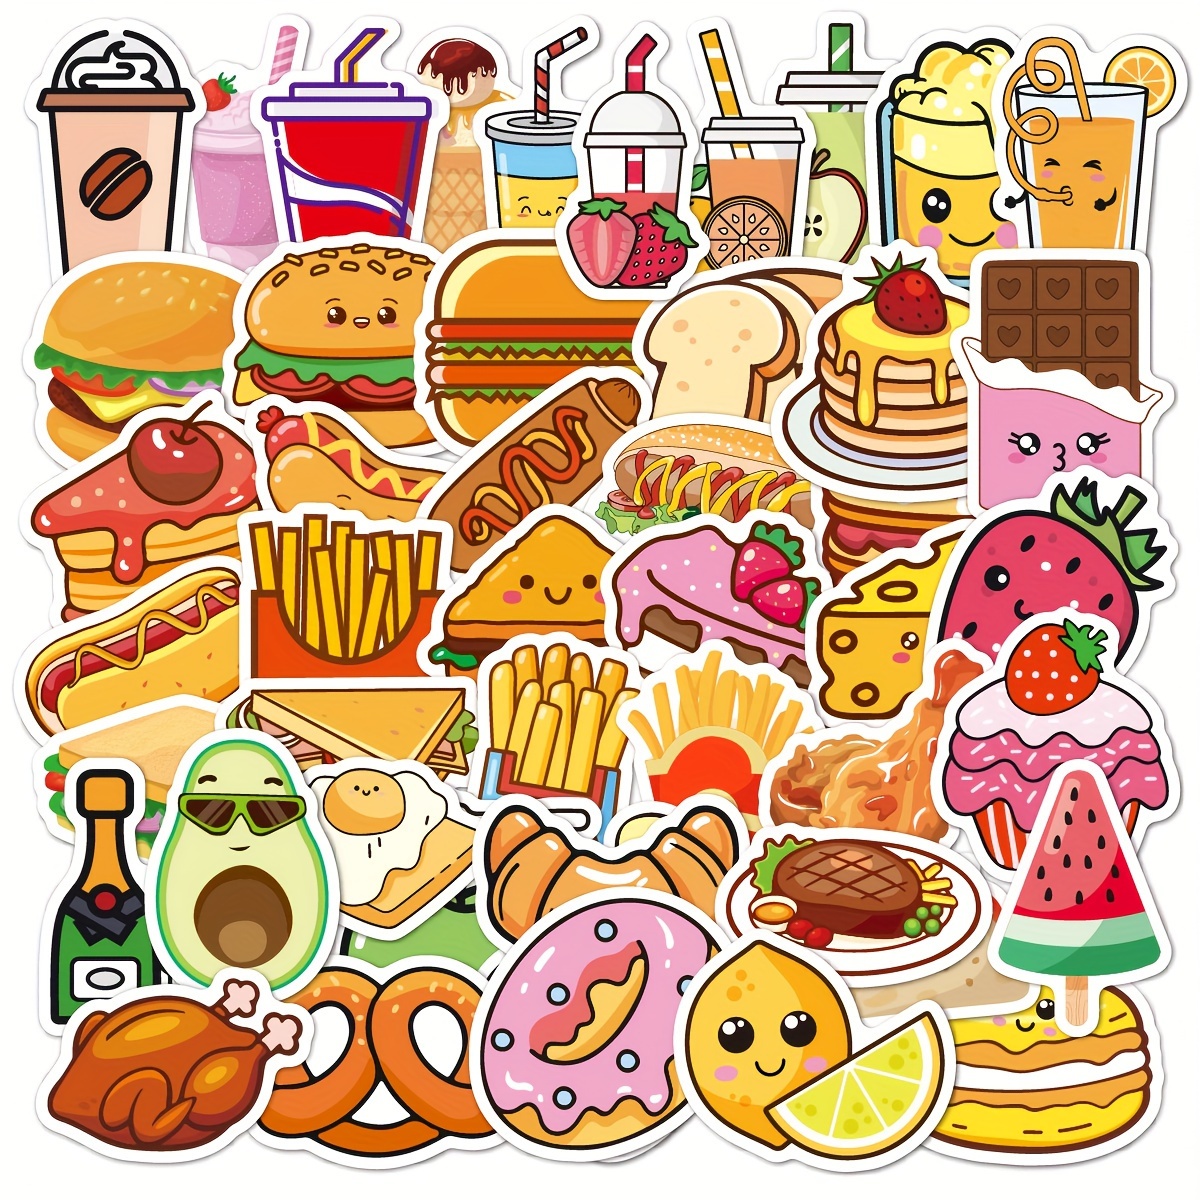 100pcs Cute Snack Stickers Food Stickers Drink Stickers Kawaii Small Beverage Stickers Decorative Masking Stickers for Personalize Laptop Scrapbook Da